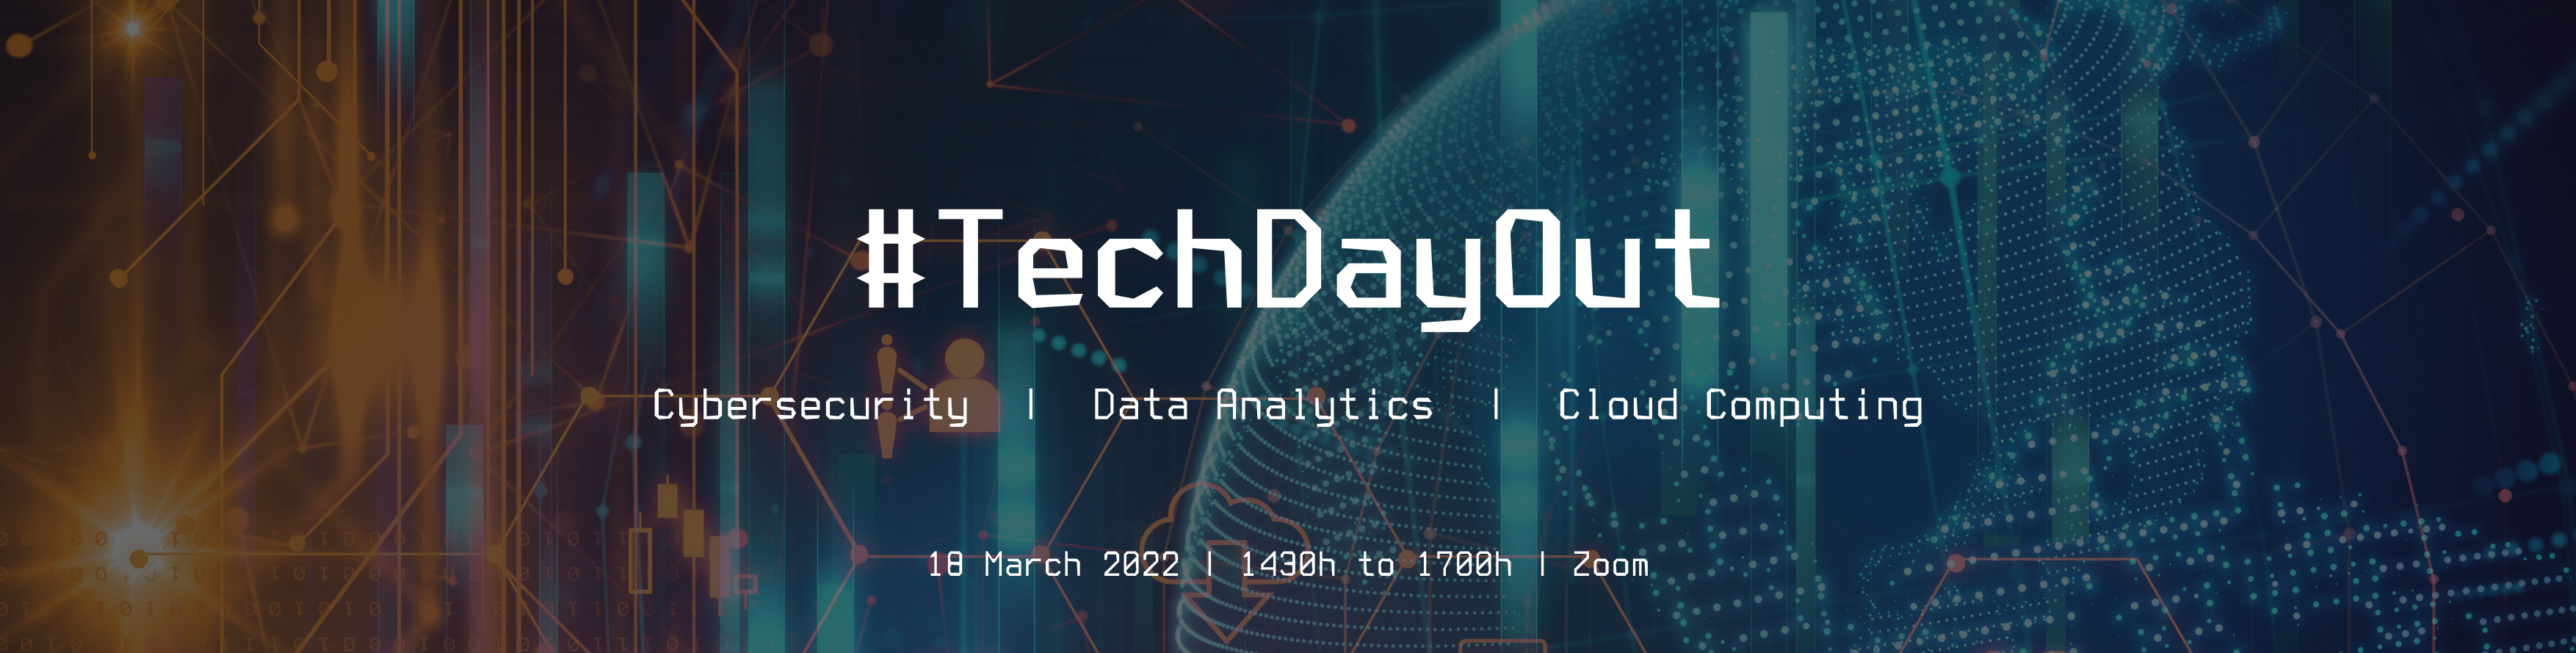 TechDayOut Banner (3508 &#215; 889 px)